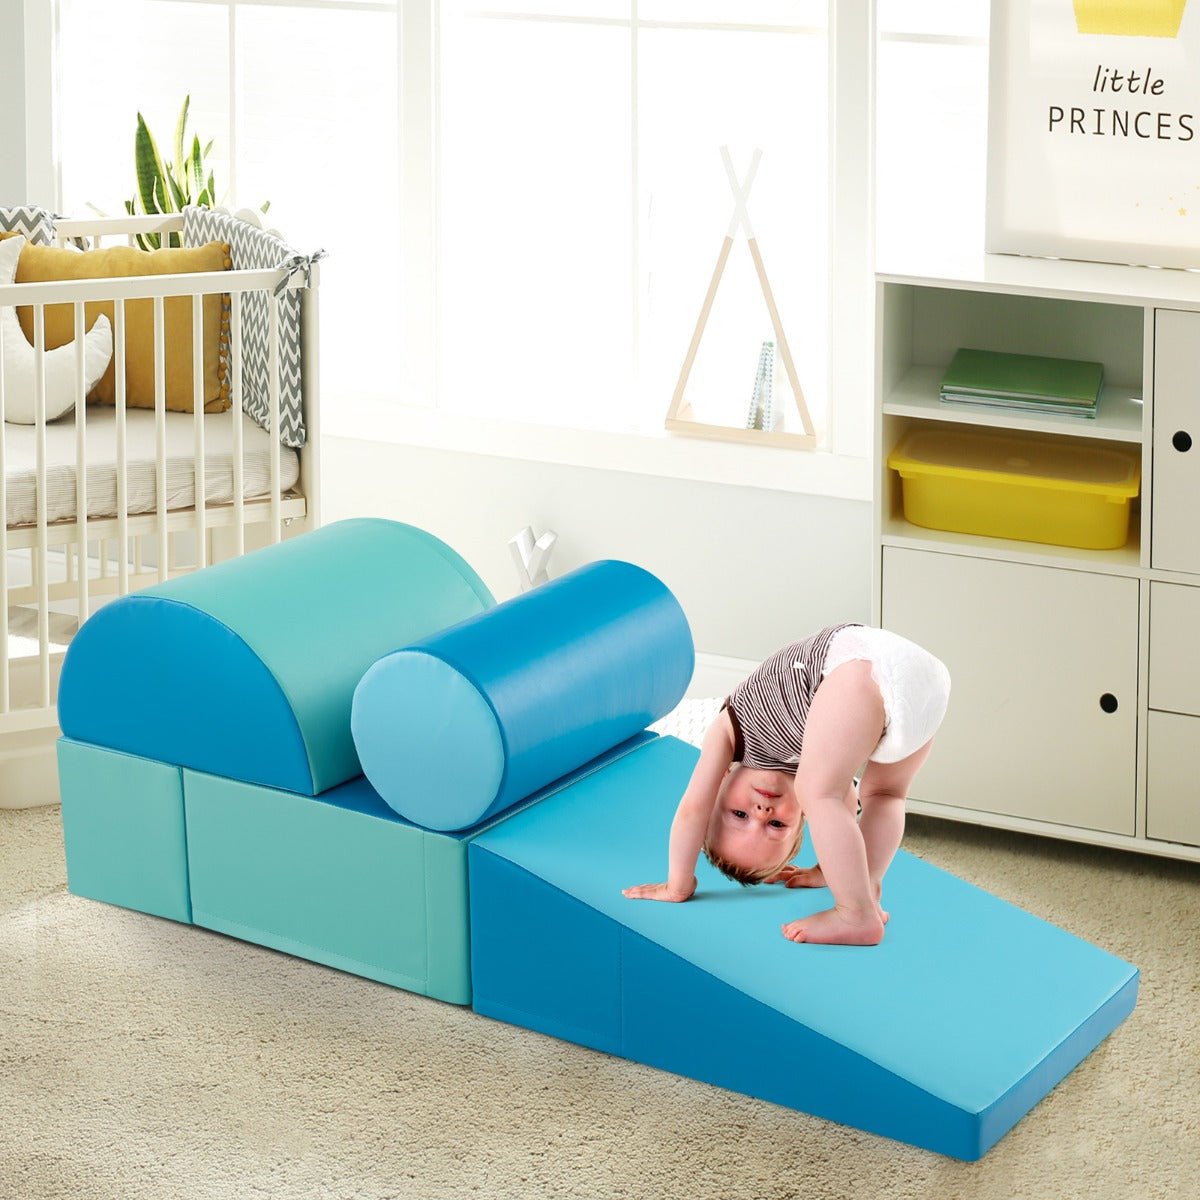 Versatile Foam Climber for Toddlers